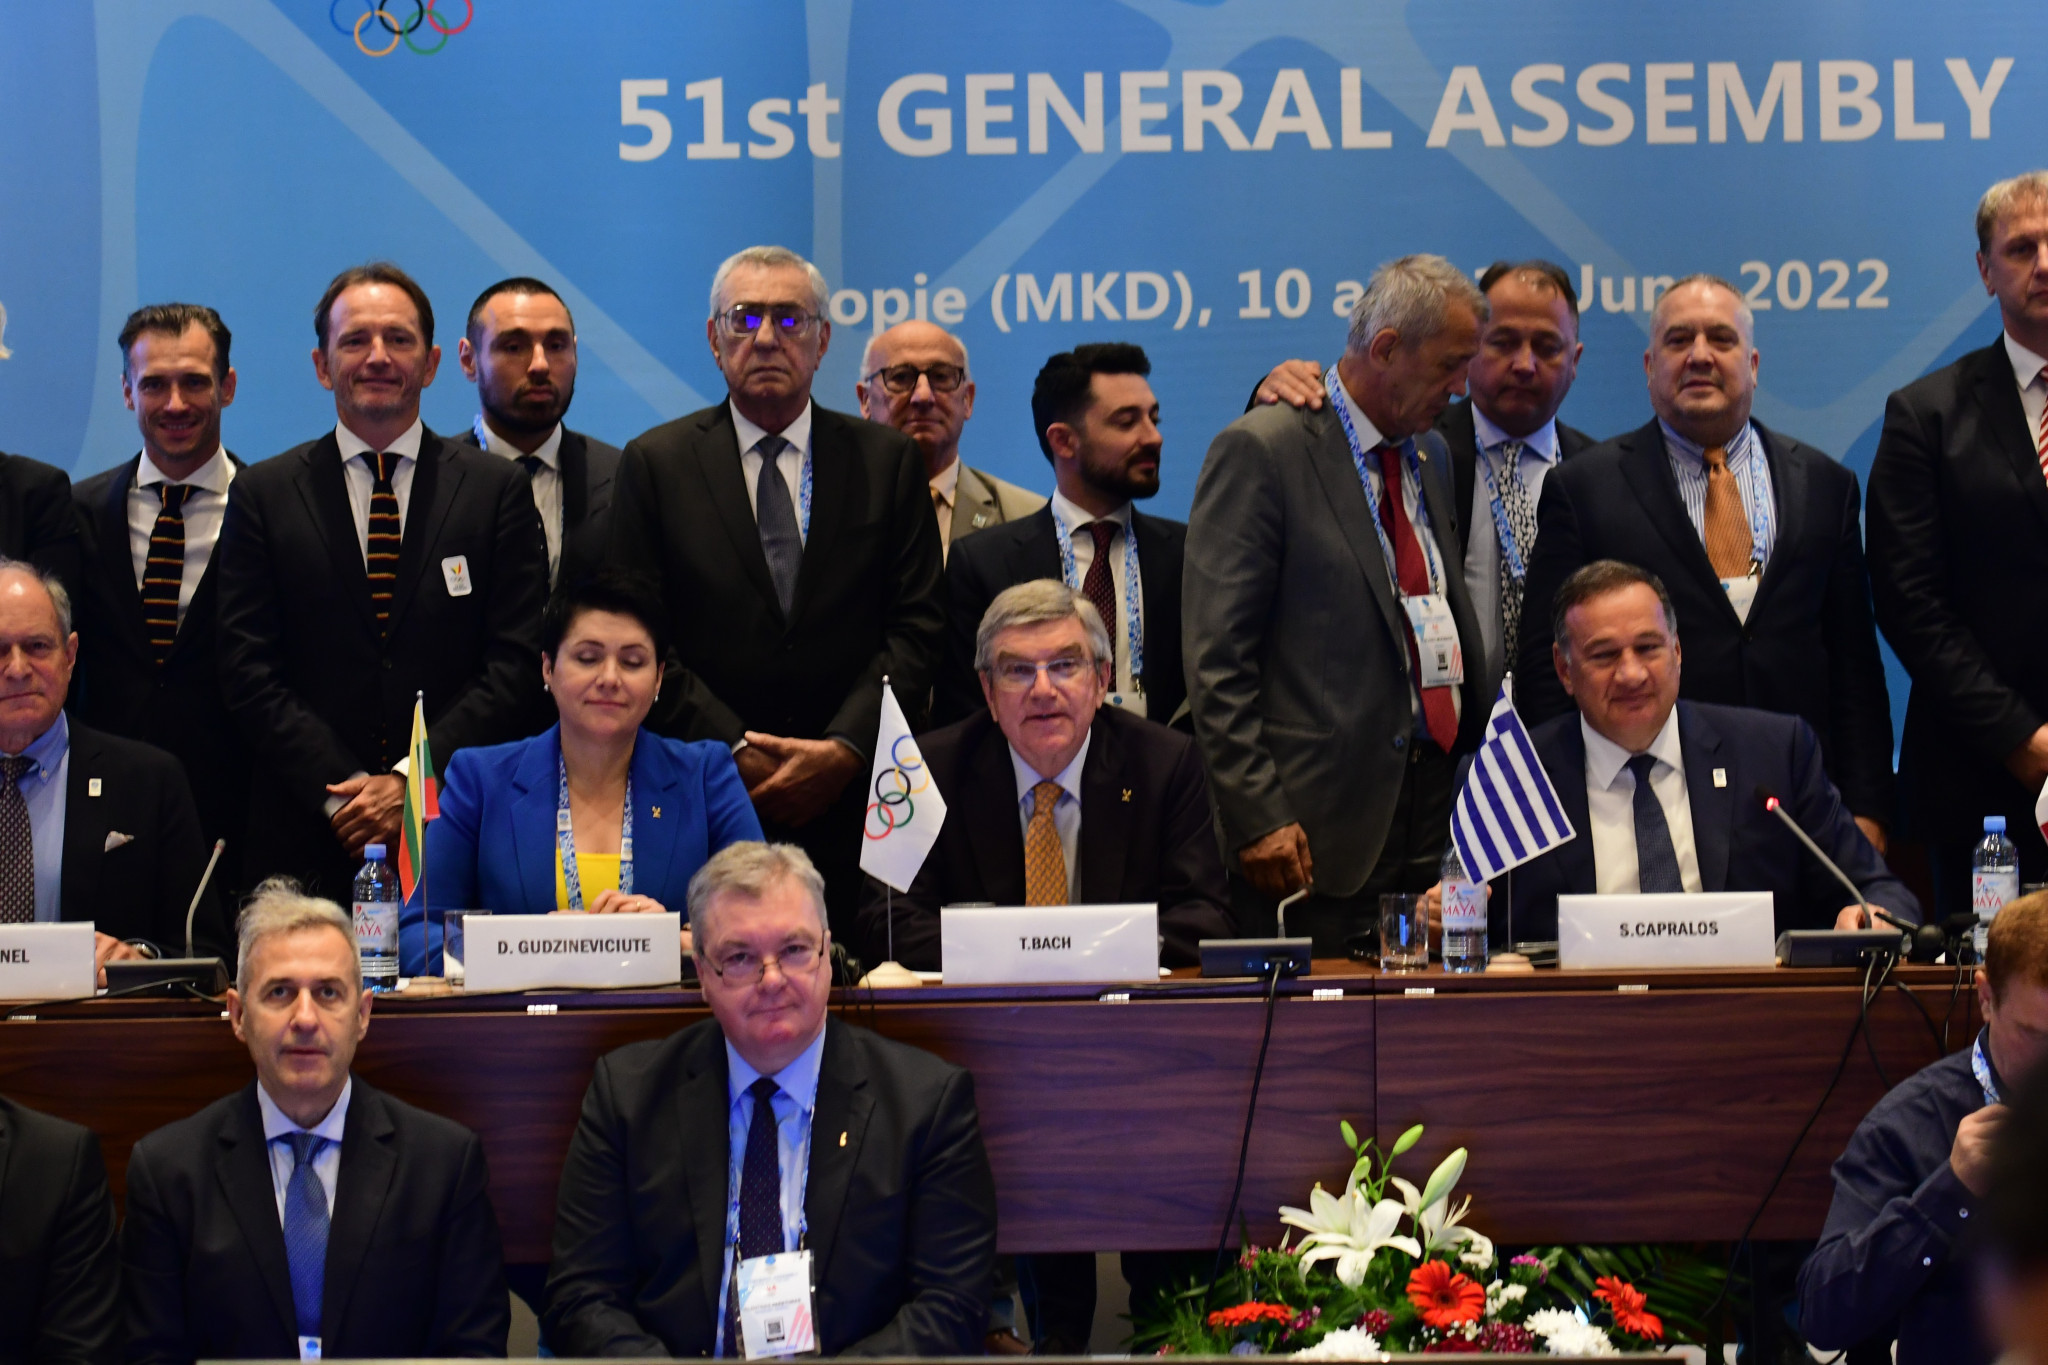 International Olympic Committee President Thomas Bach, centre, was among those in attendance ©EOC